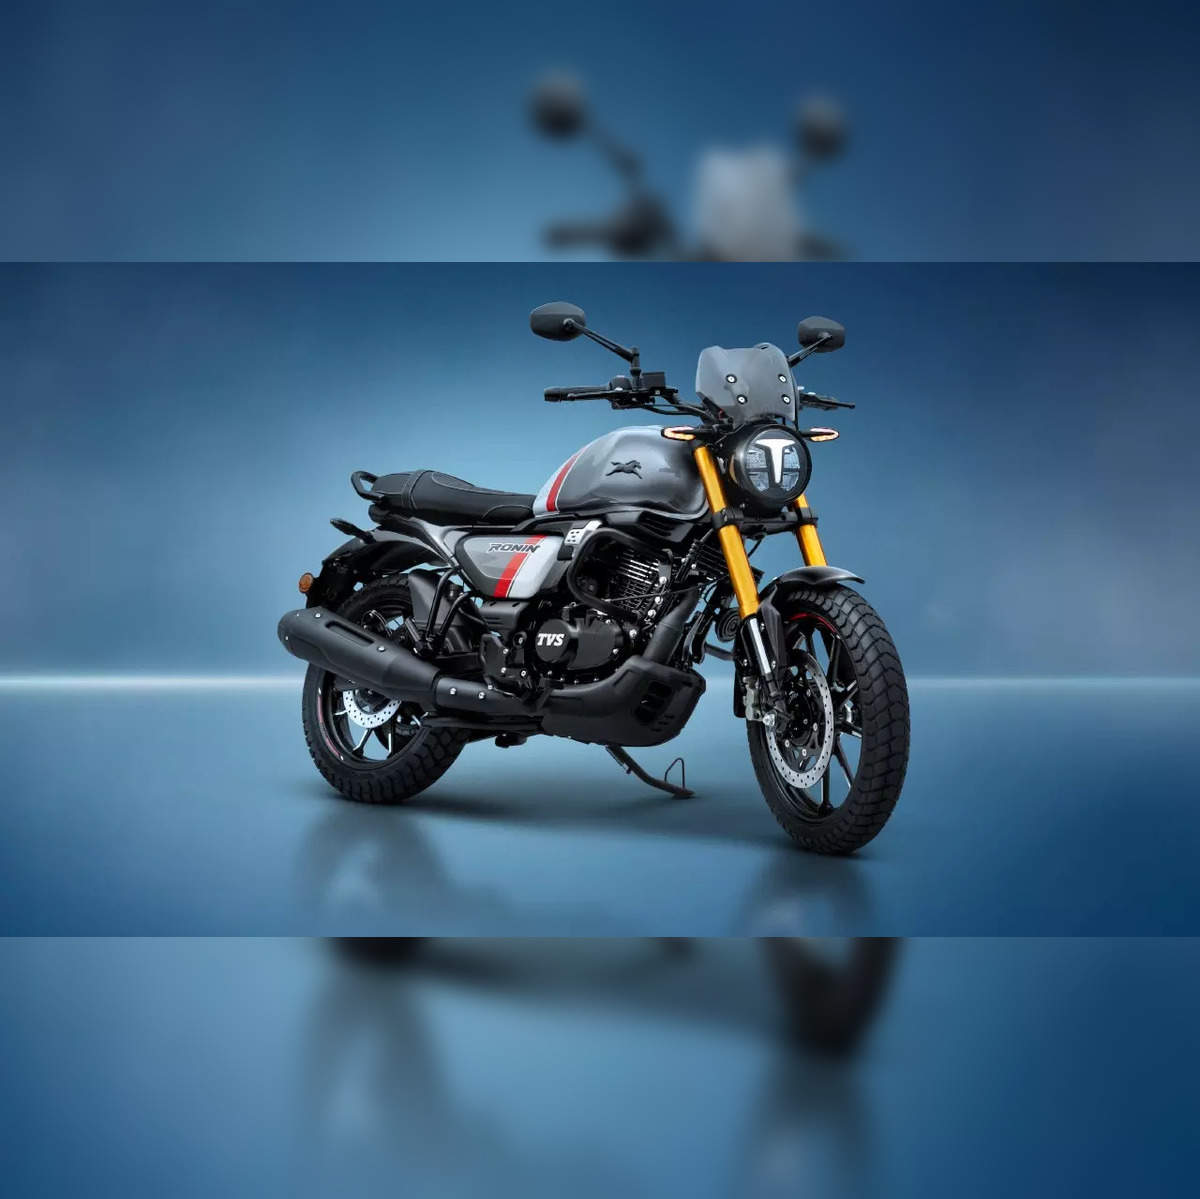 tvs ronin td: TVS Motors launches Ronin special edition - The Economic Times